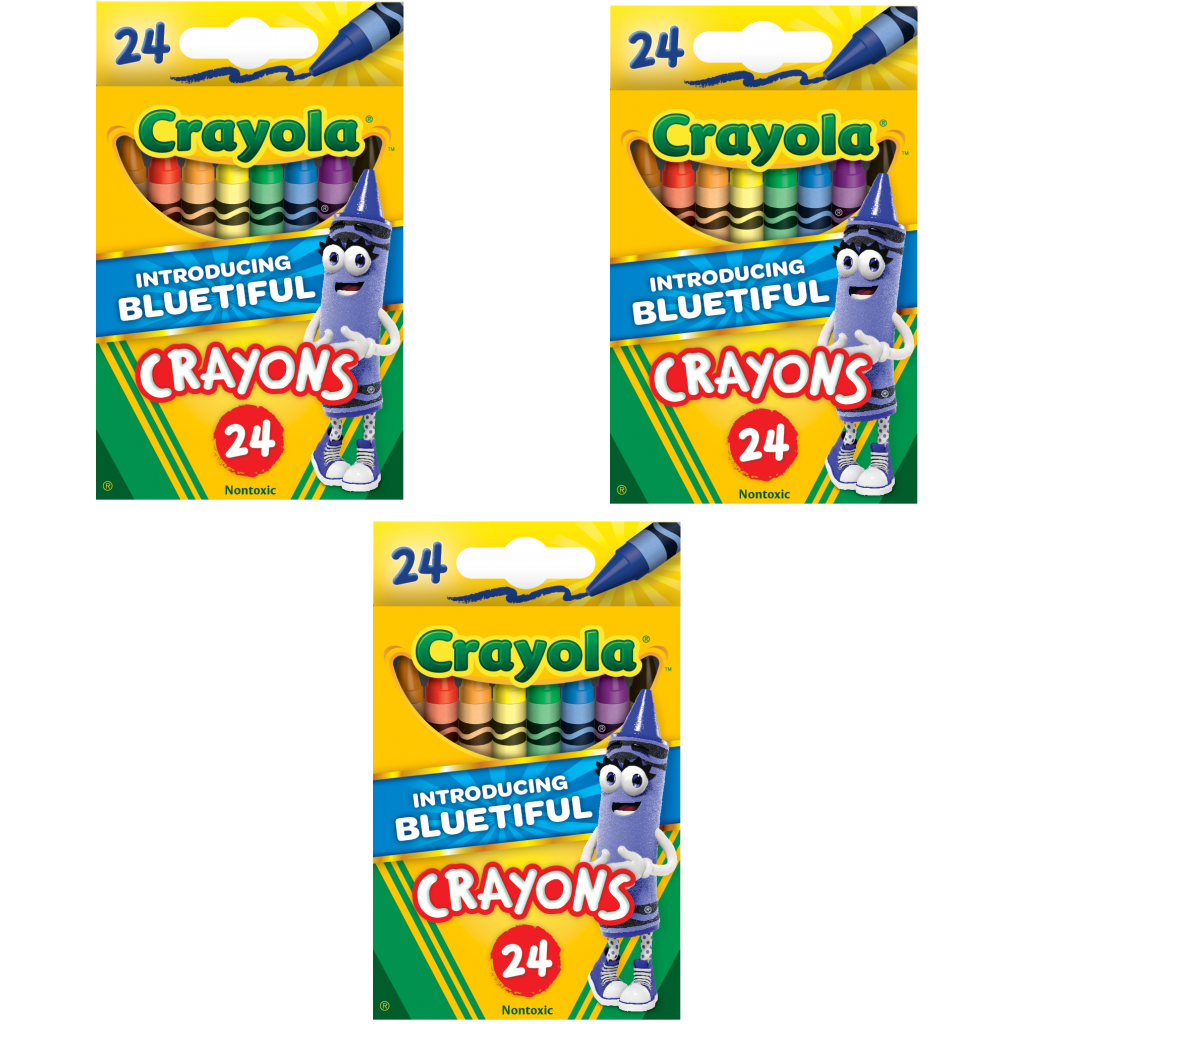 Crayola Classic Crayons School Supplies 24 Count (Pack of 3)